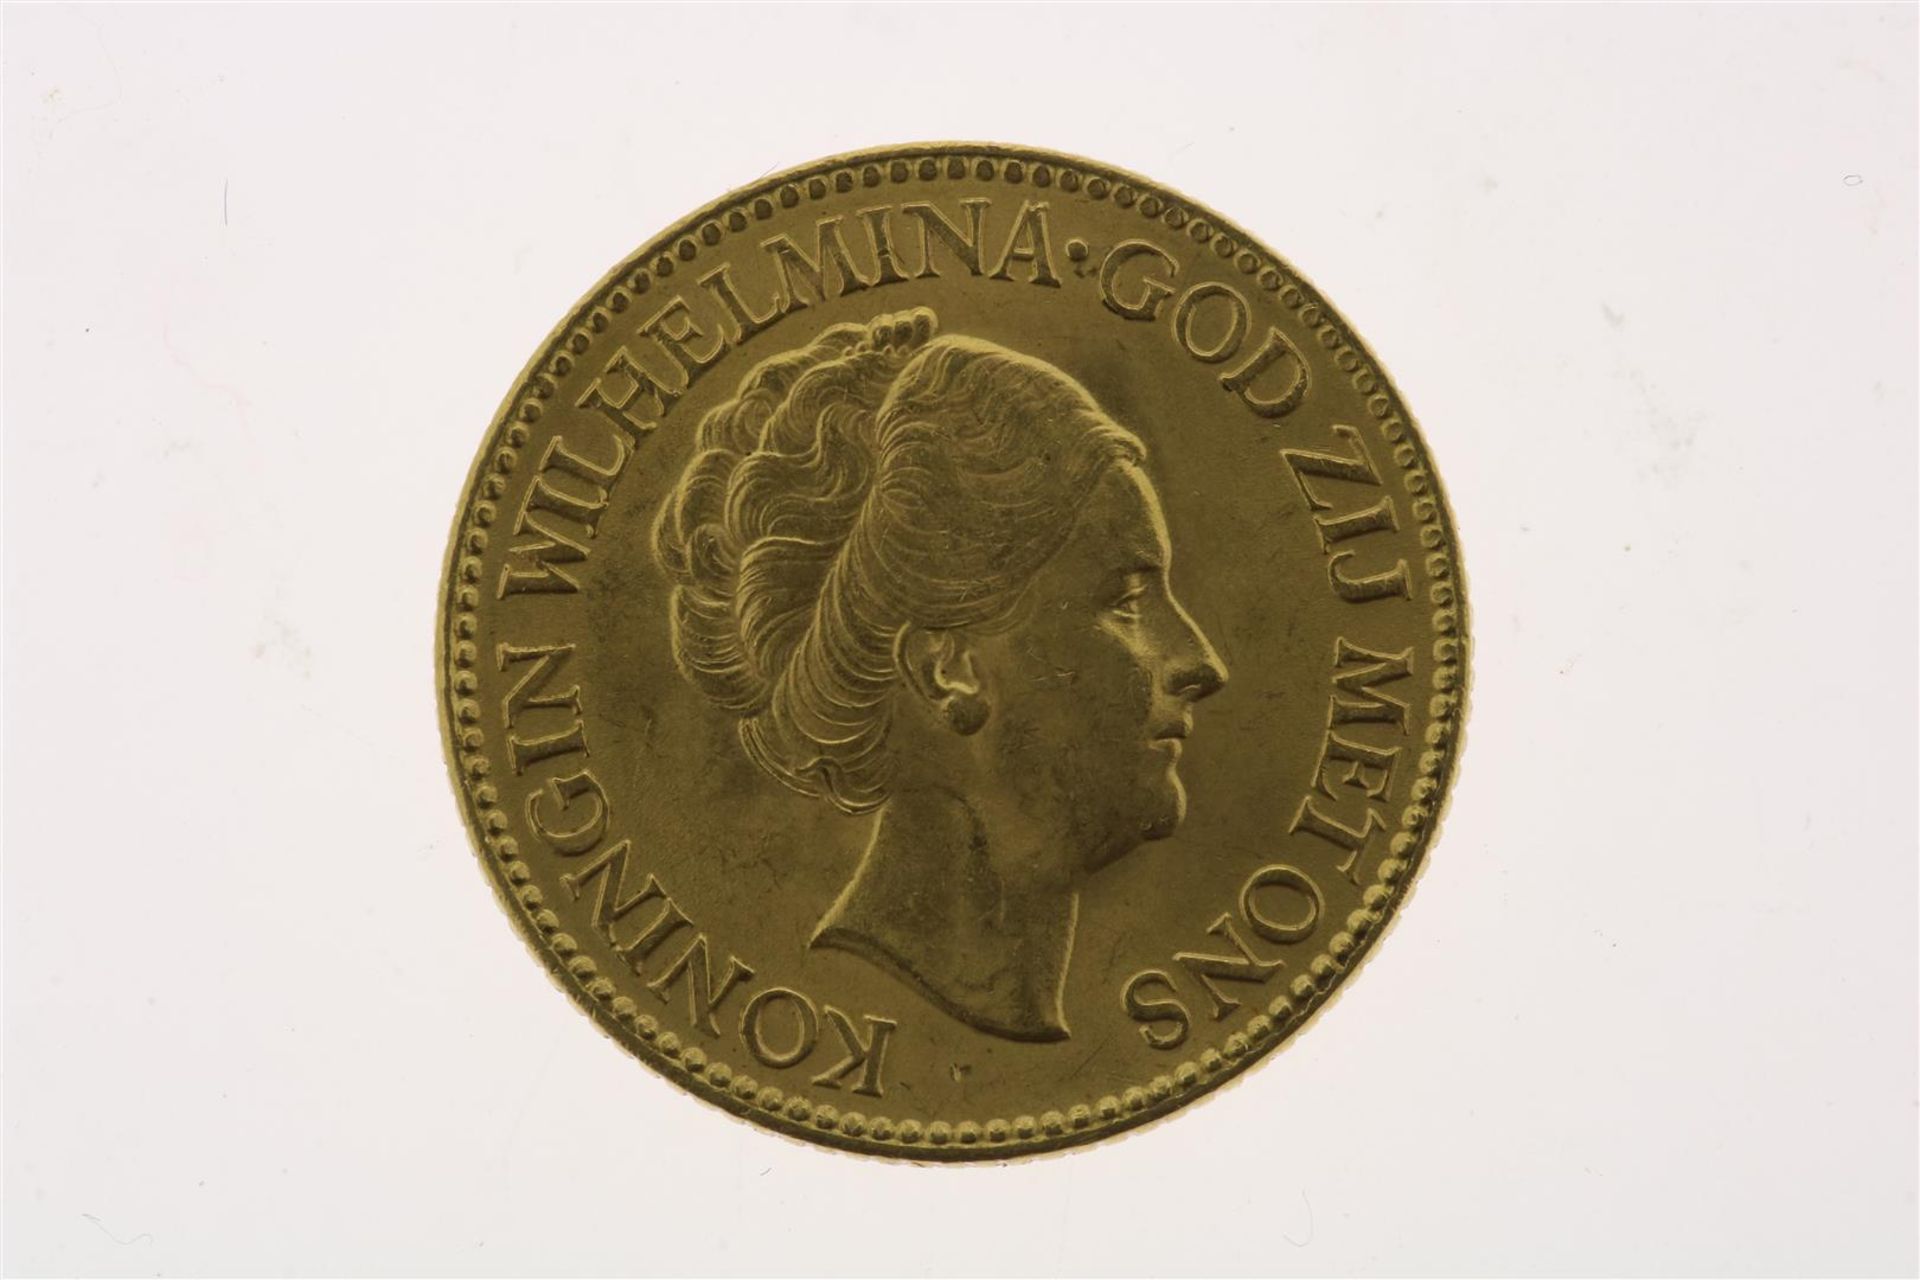 Gold tenner with image of Wilhelmina with updo hair, in an ermine cloak, looking to the right, 1932,